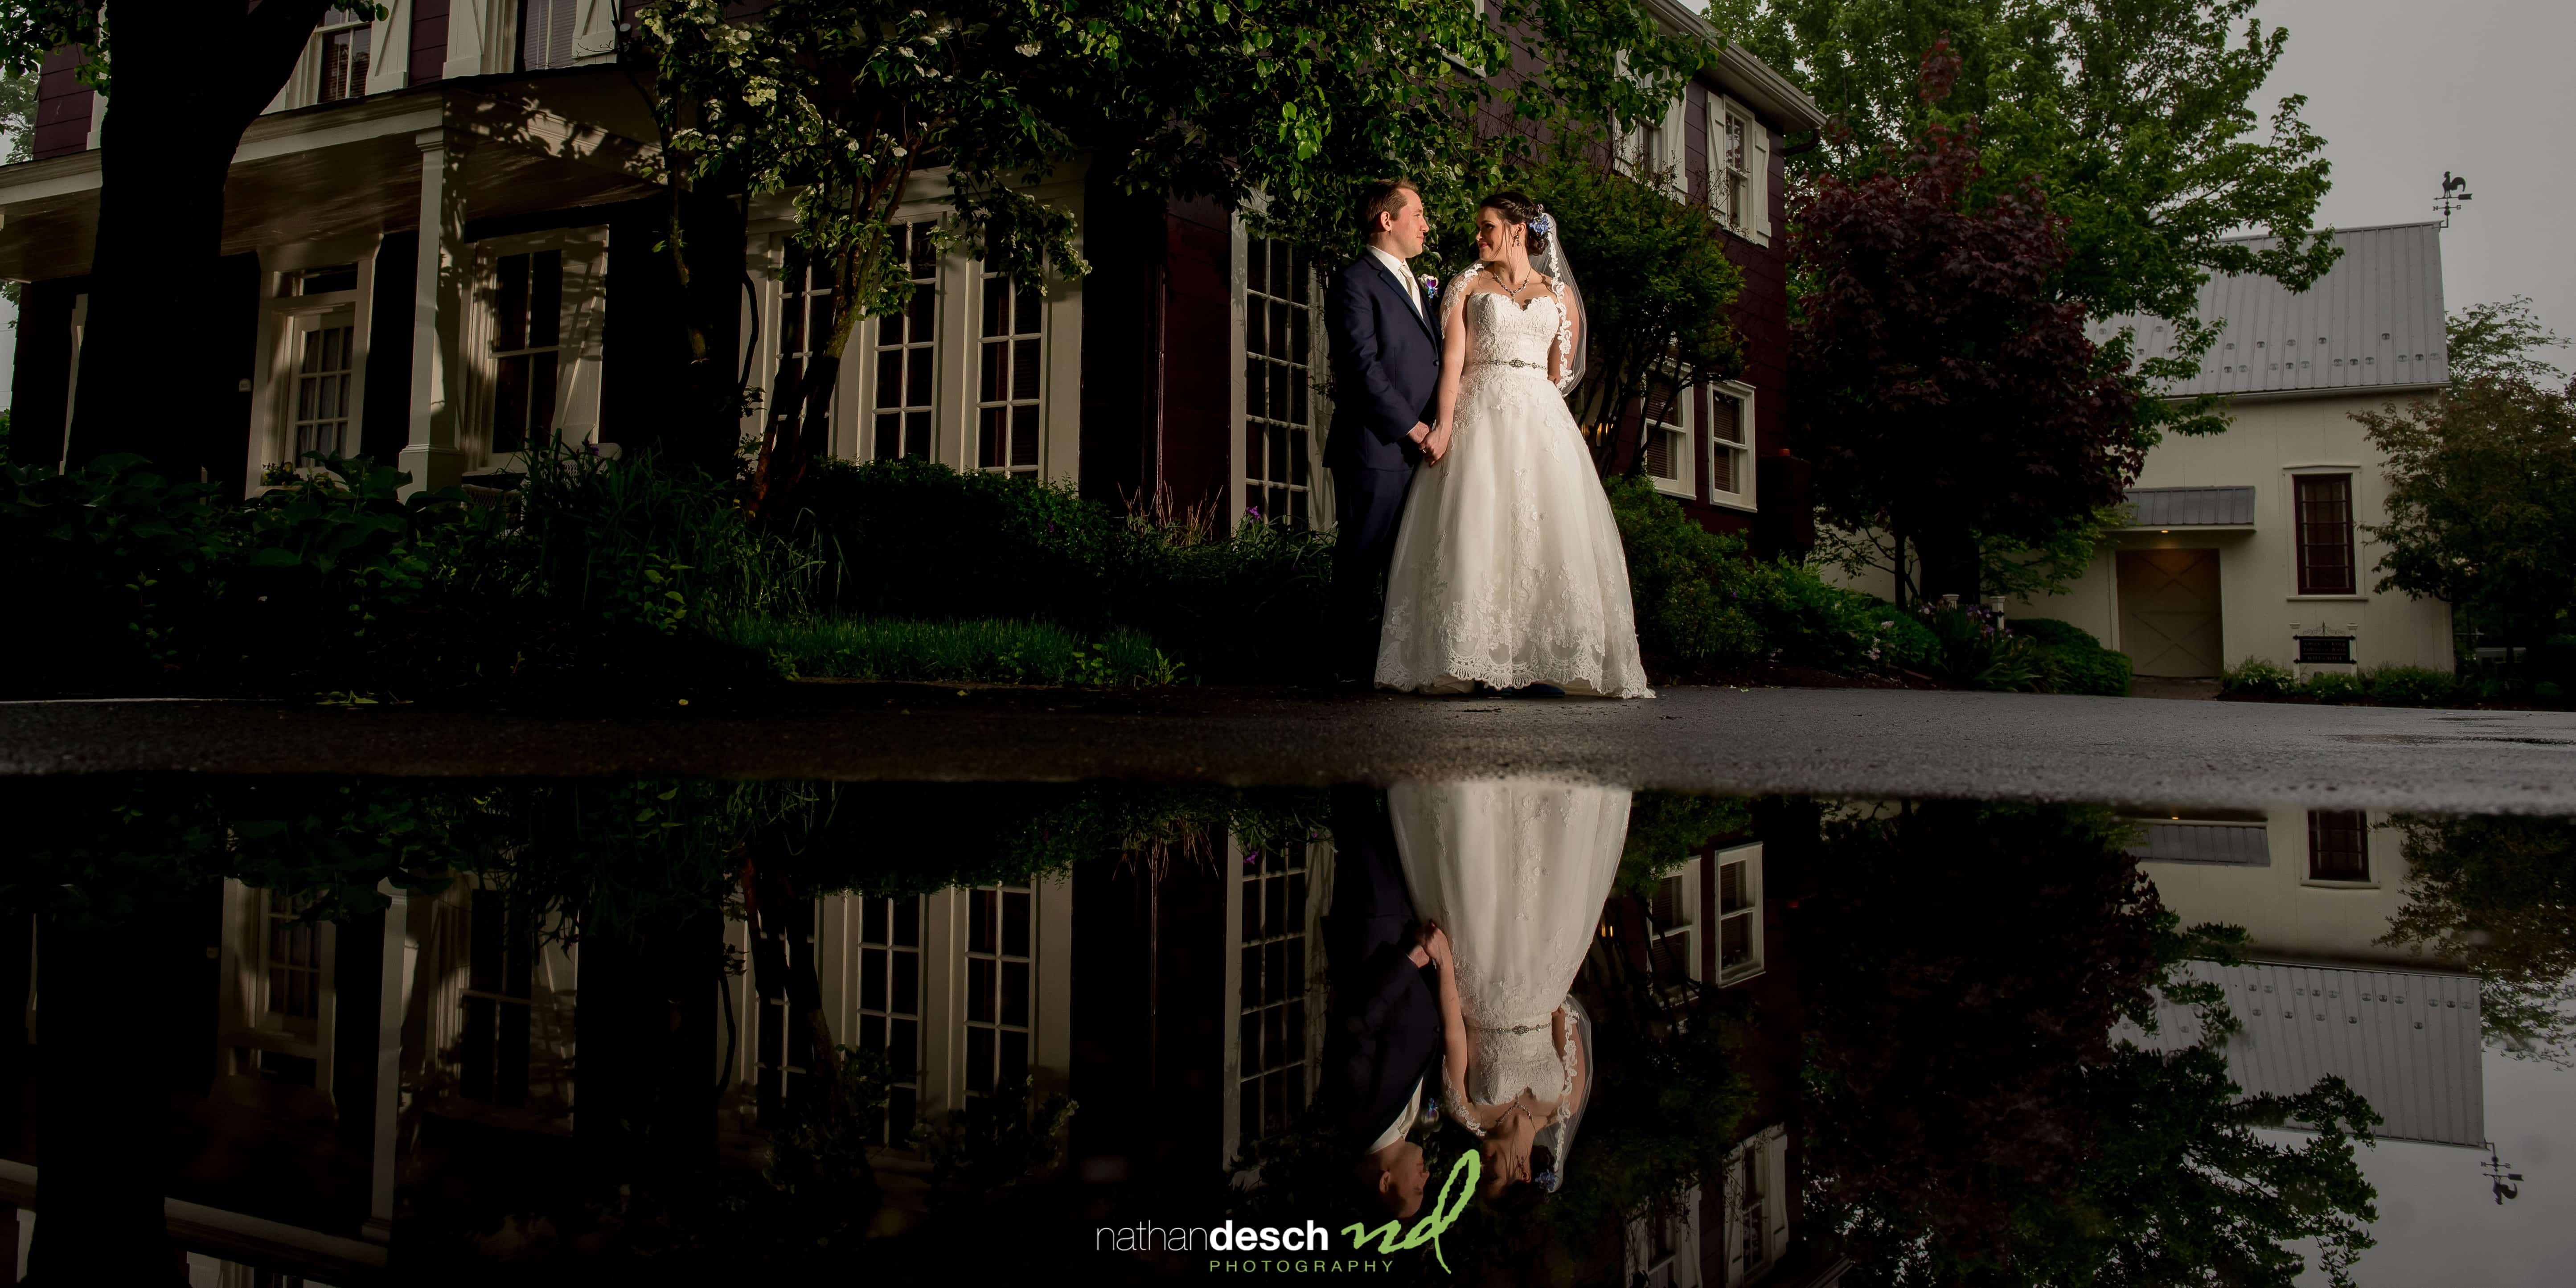 Wedding pictures from the inn at leola village